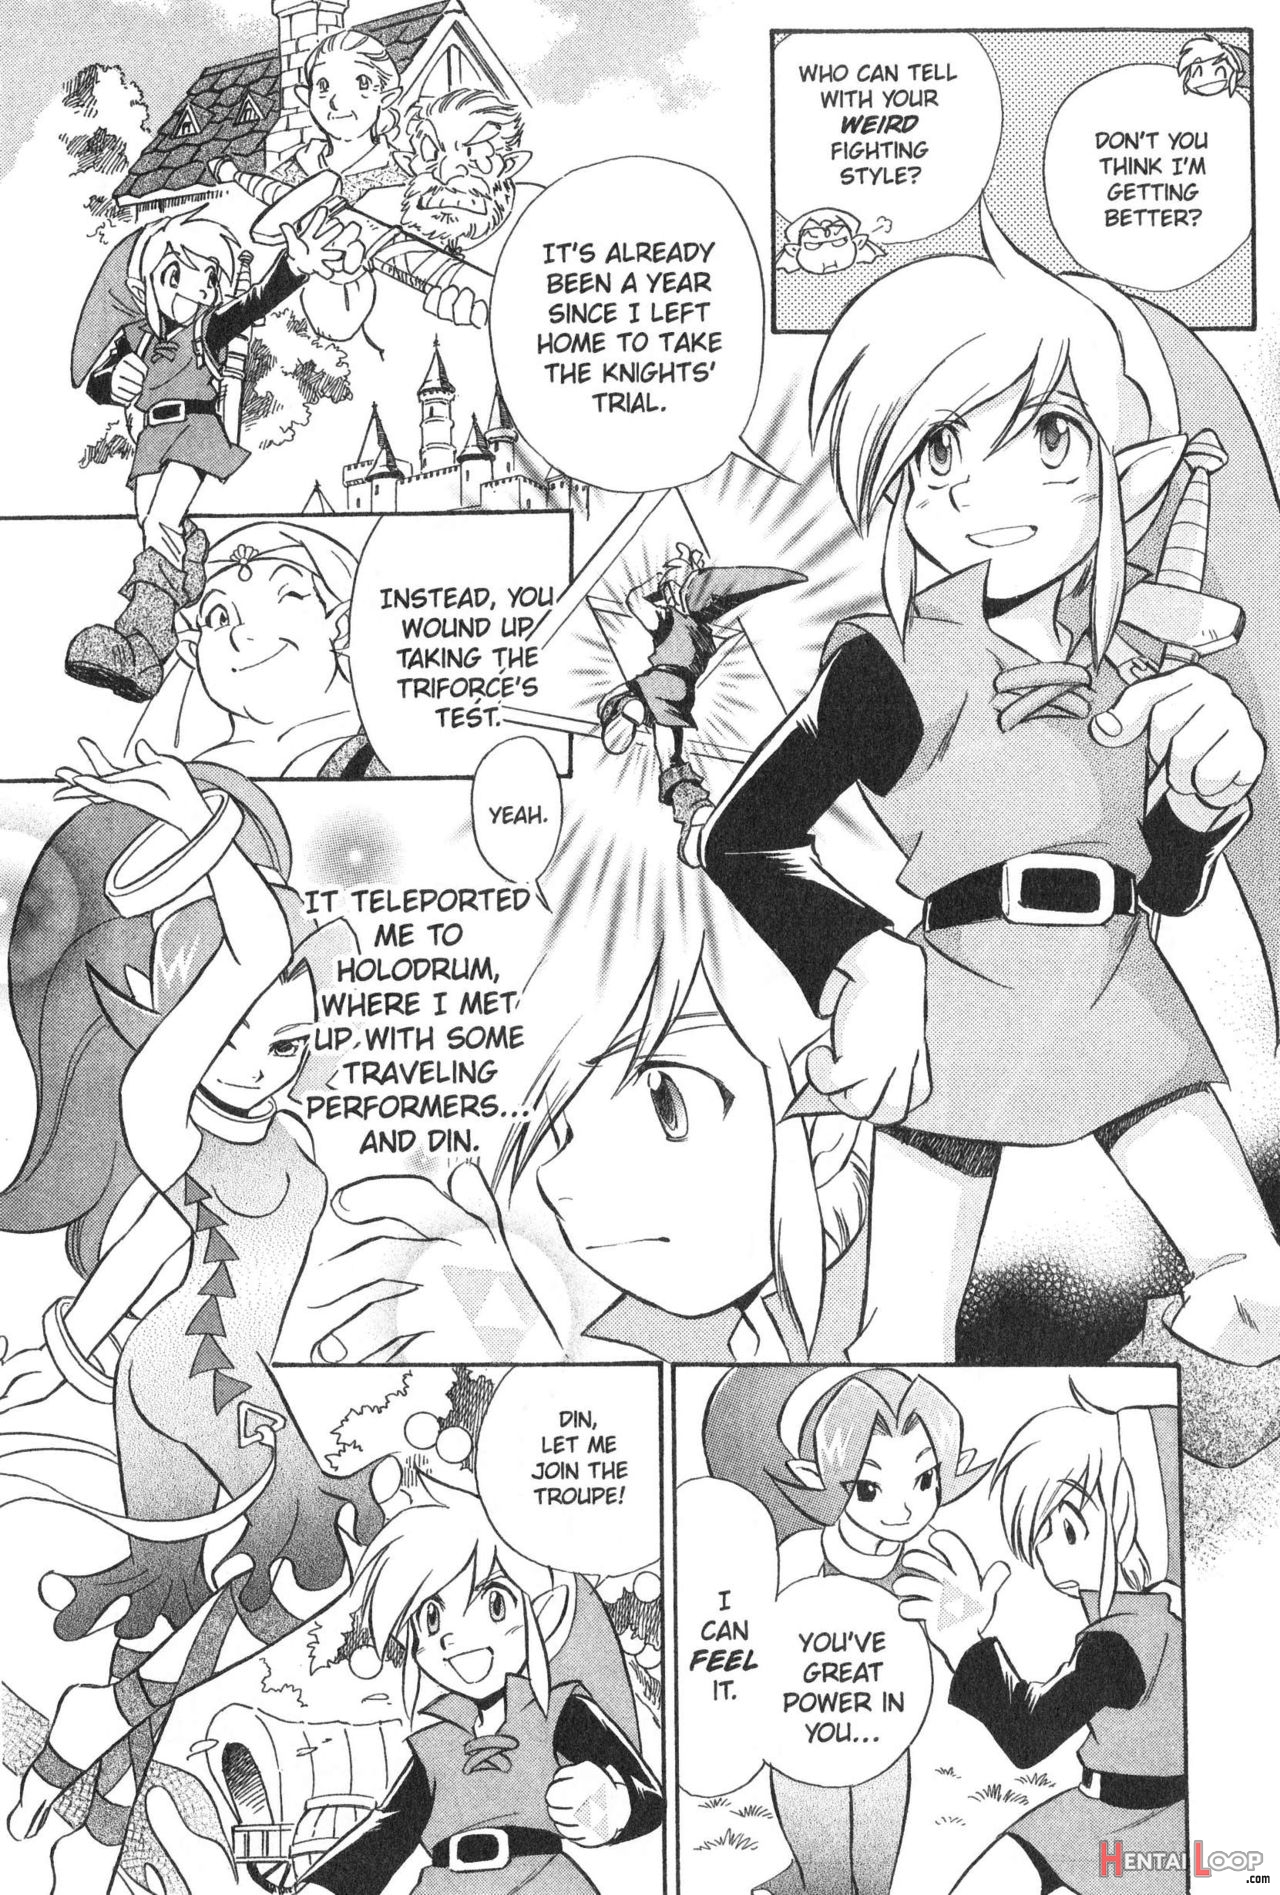 The Legend Of Zelda - Oracle Of Ages Manga page 9